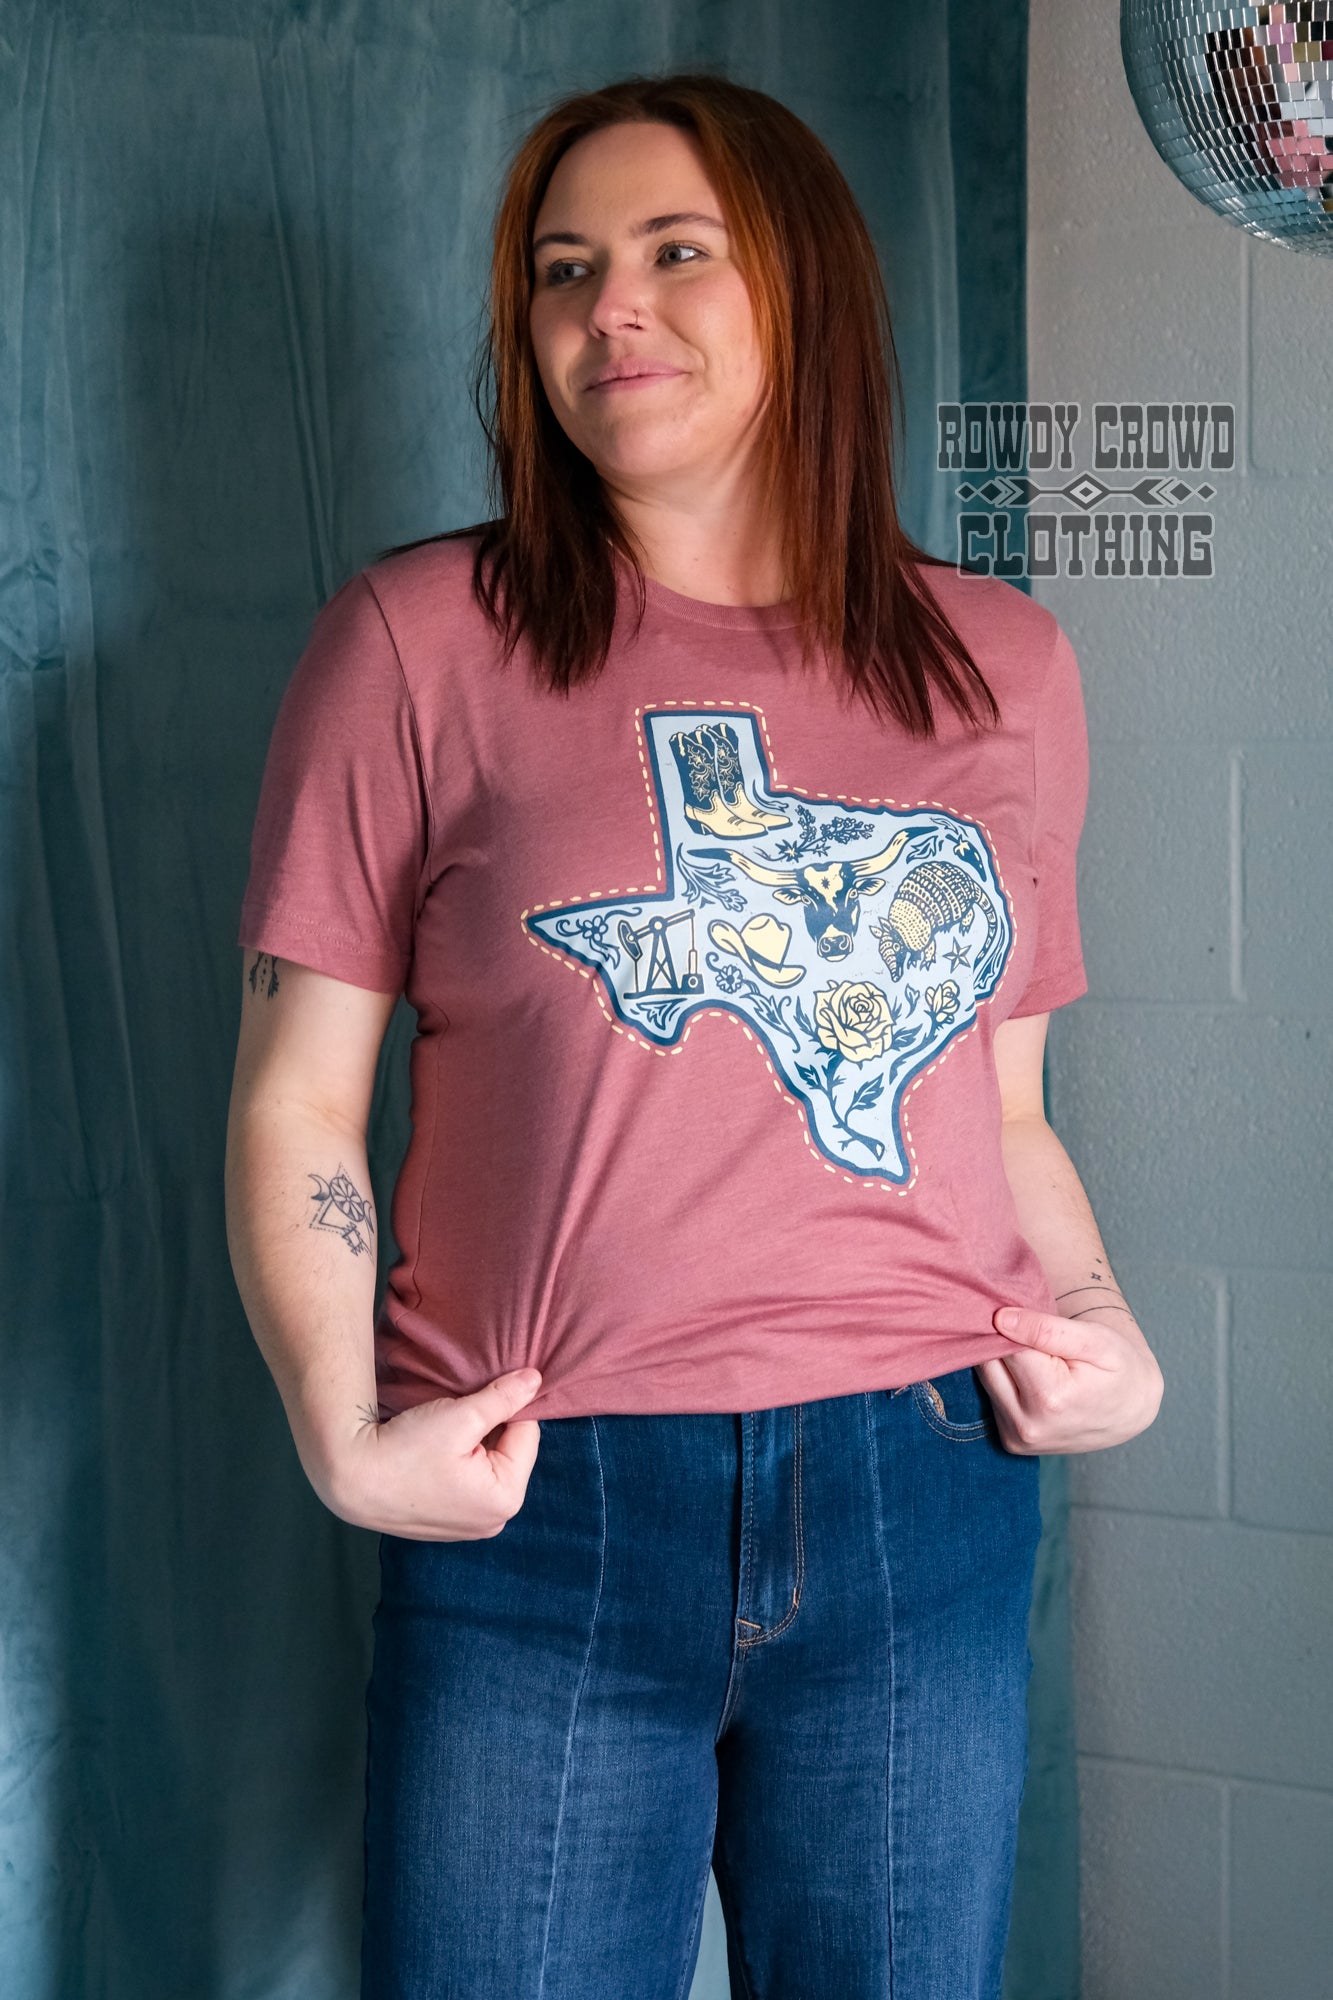 western apparel, western graphic tee, graphic western tees, wholesale clothing, western wholesale, women's western graphic tees, wholesale clothing and jewelry, western boutique clothing, western women's graphic tee, texas womens tee, texas graphic tee, texas tee